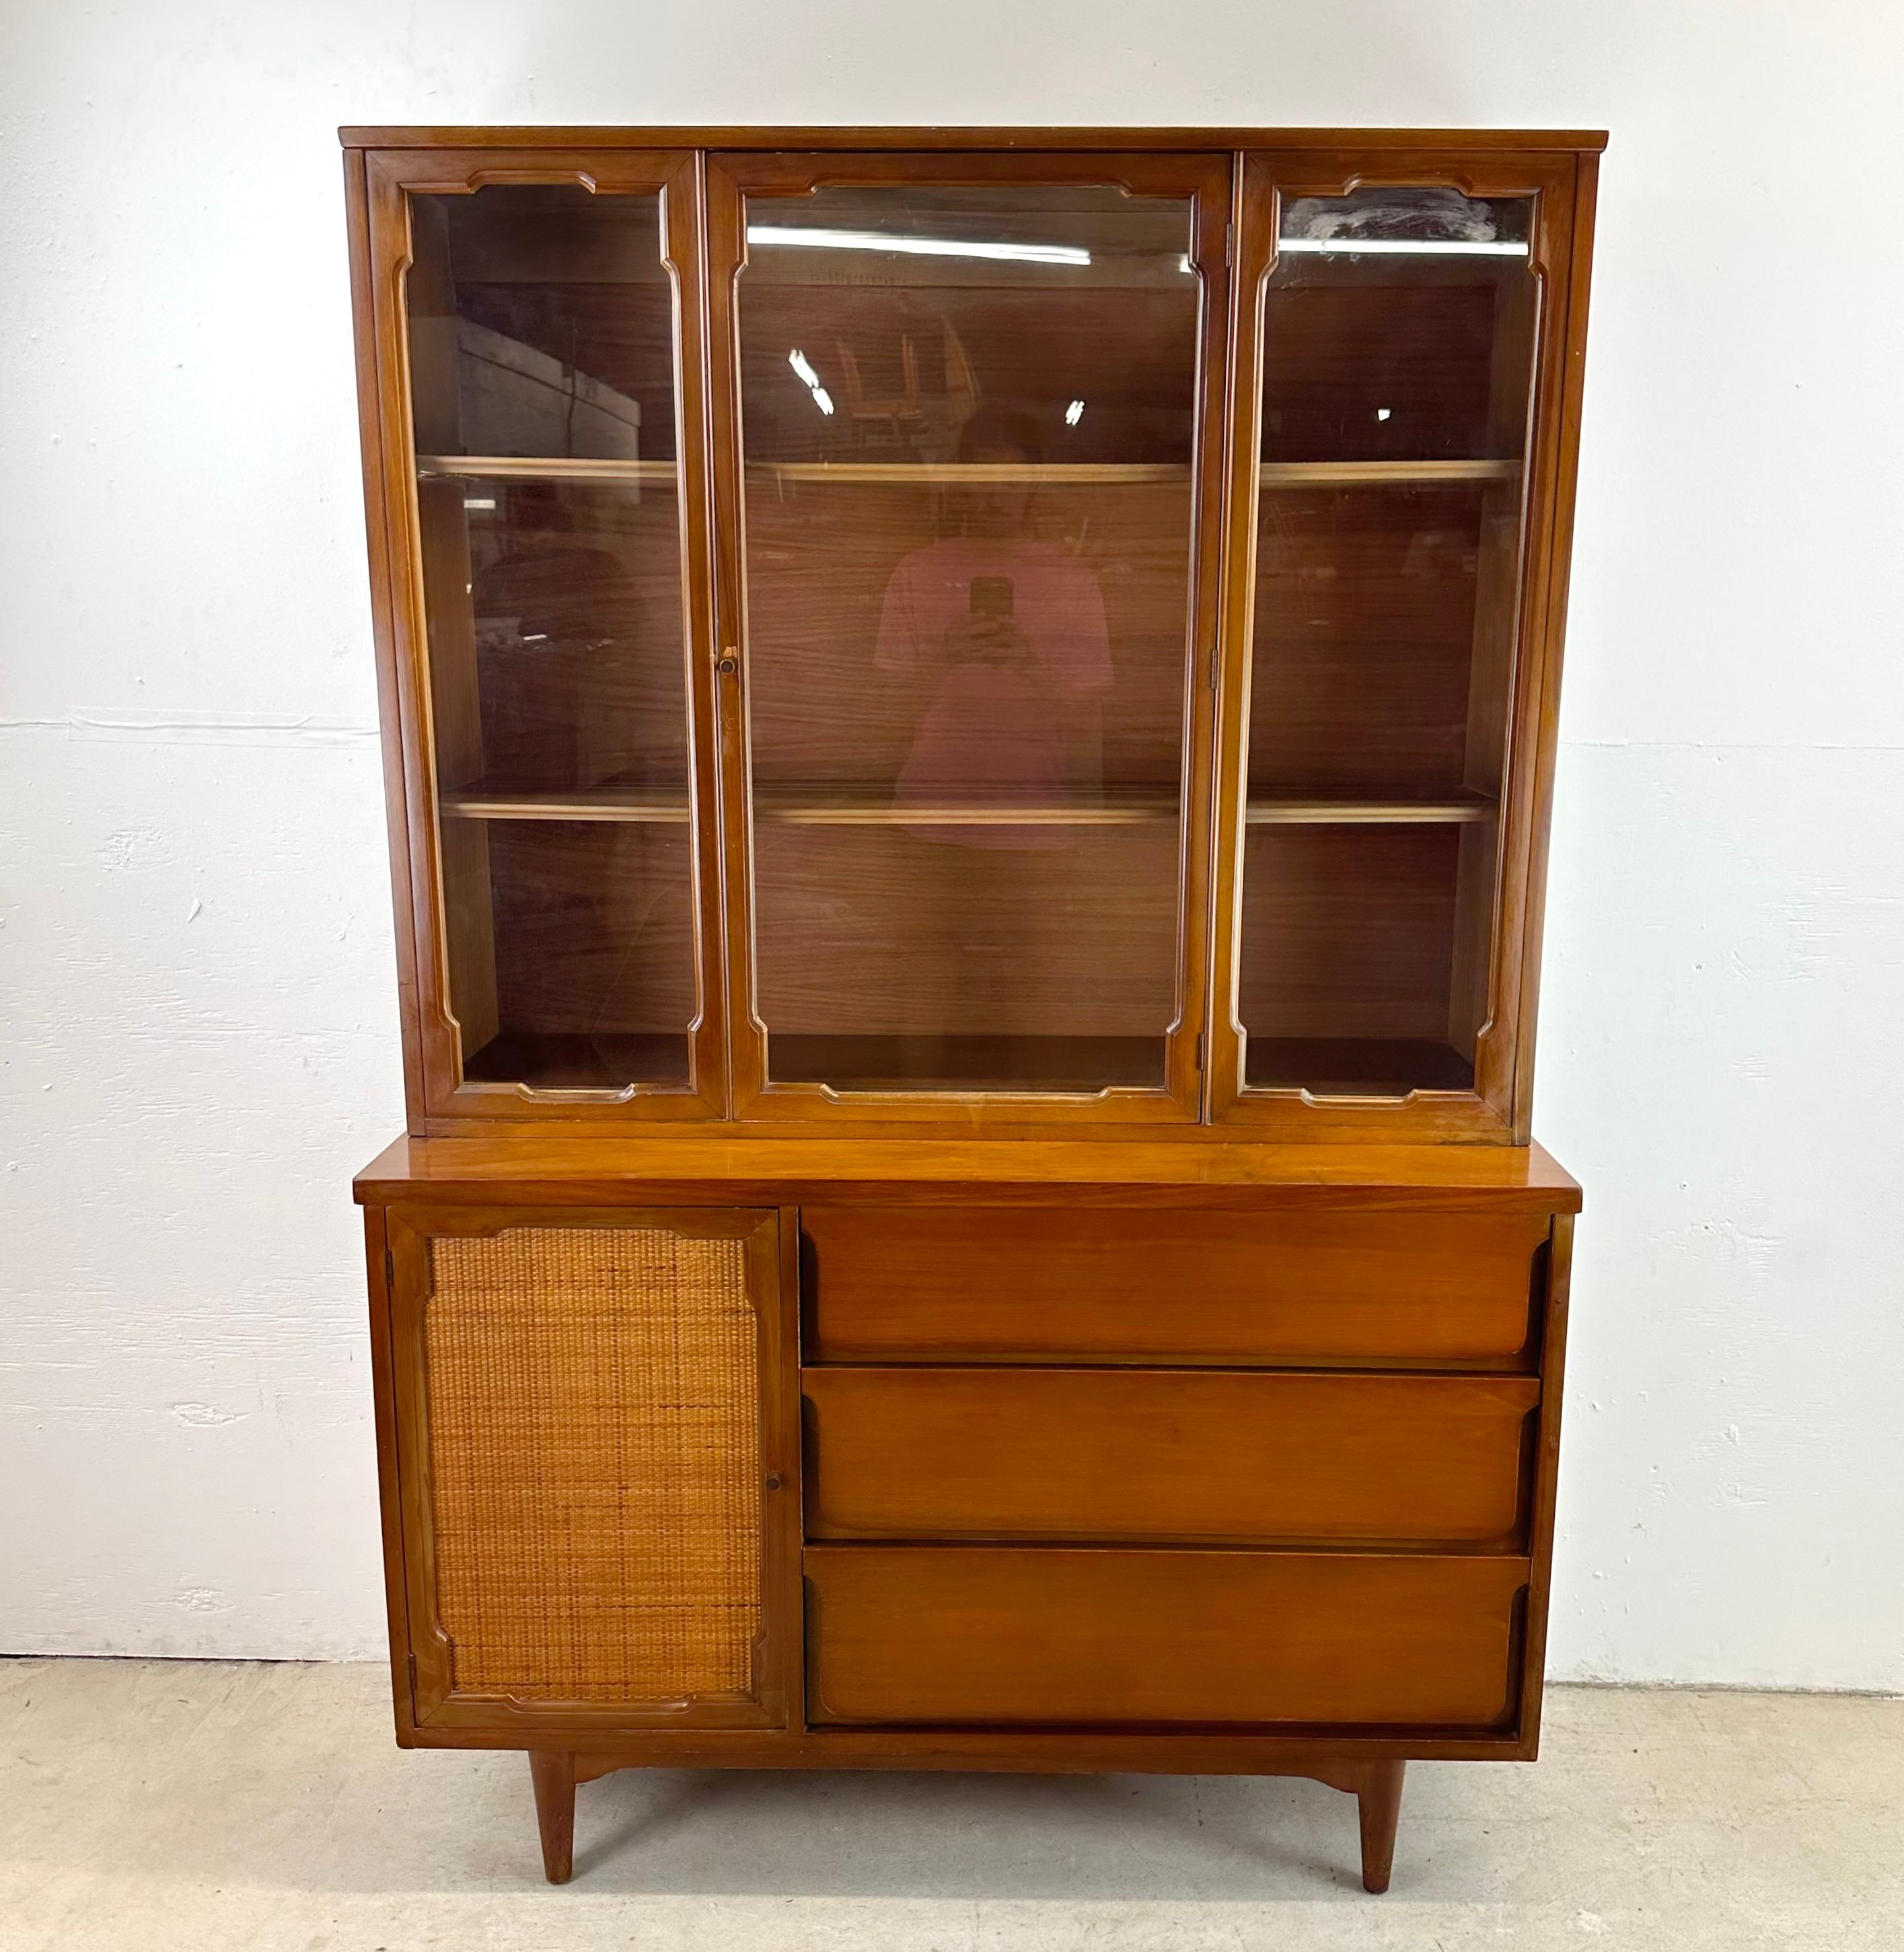 This mid-century Walnut china cabinet features unique vintage design in the style of the esteemed designer Jack Cartwright. This exquisite piece seamlessly fuses classic design with functional craftsmanship, making it a captivating addition to any